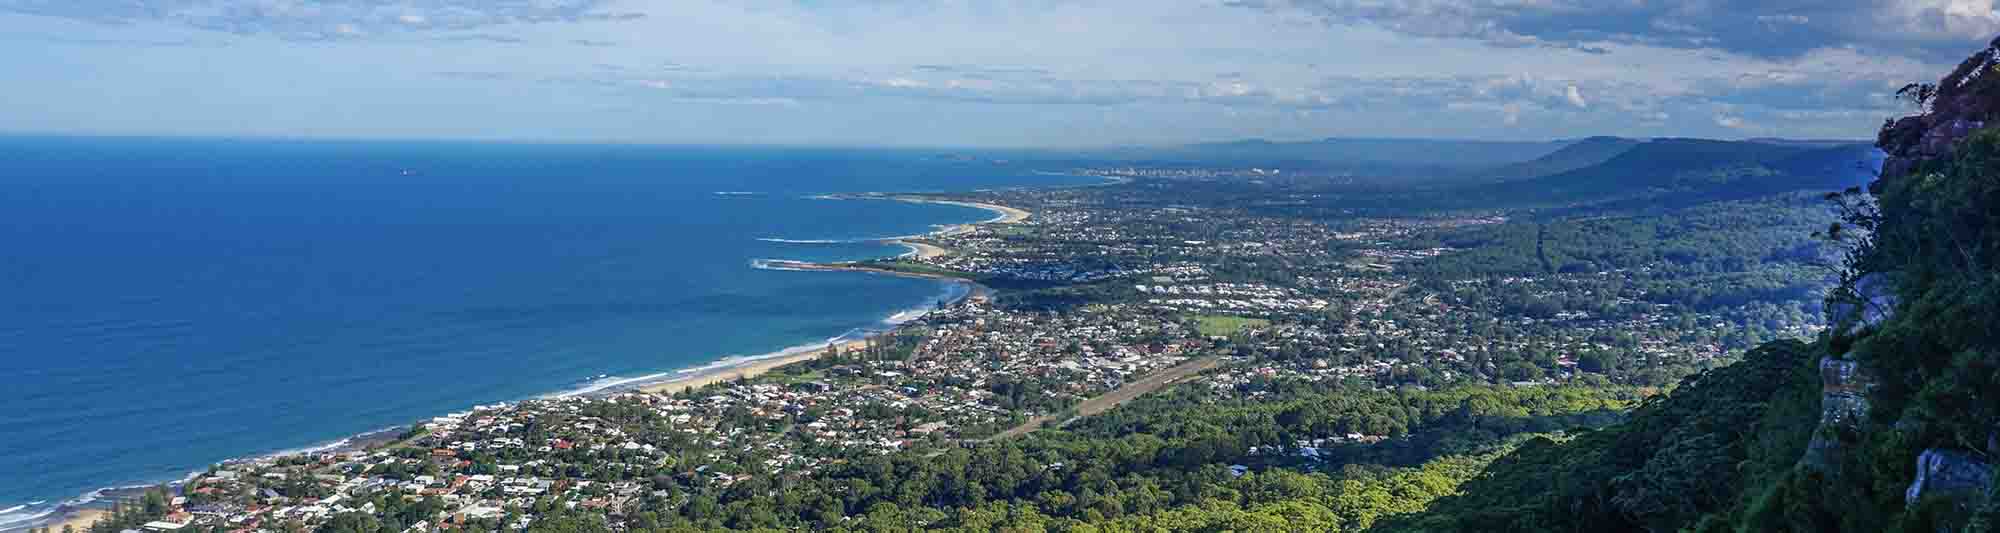 aerial view of wollongong